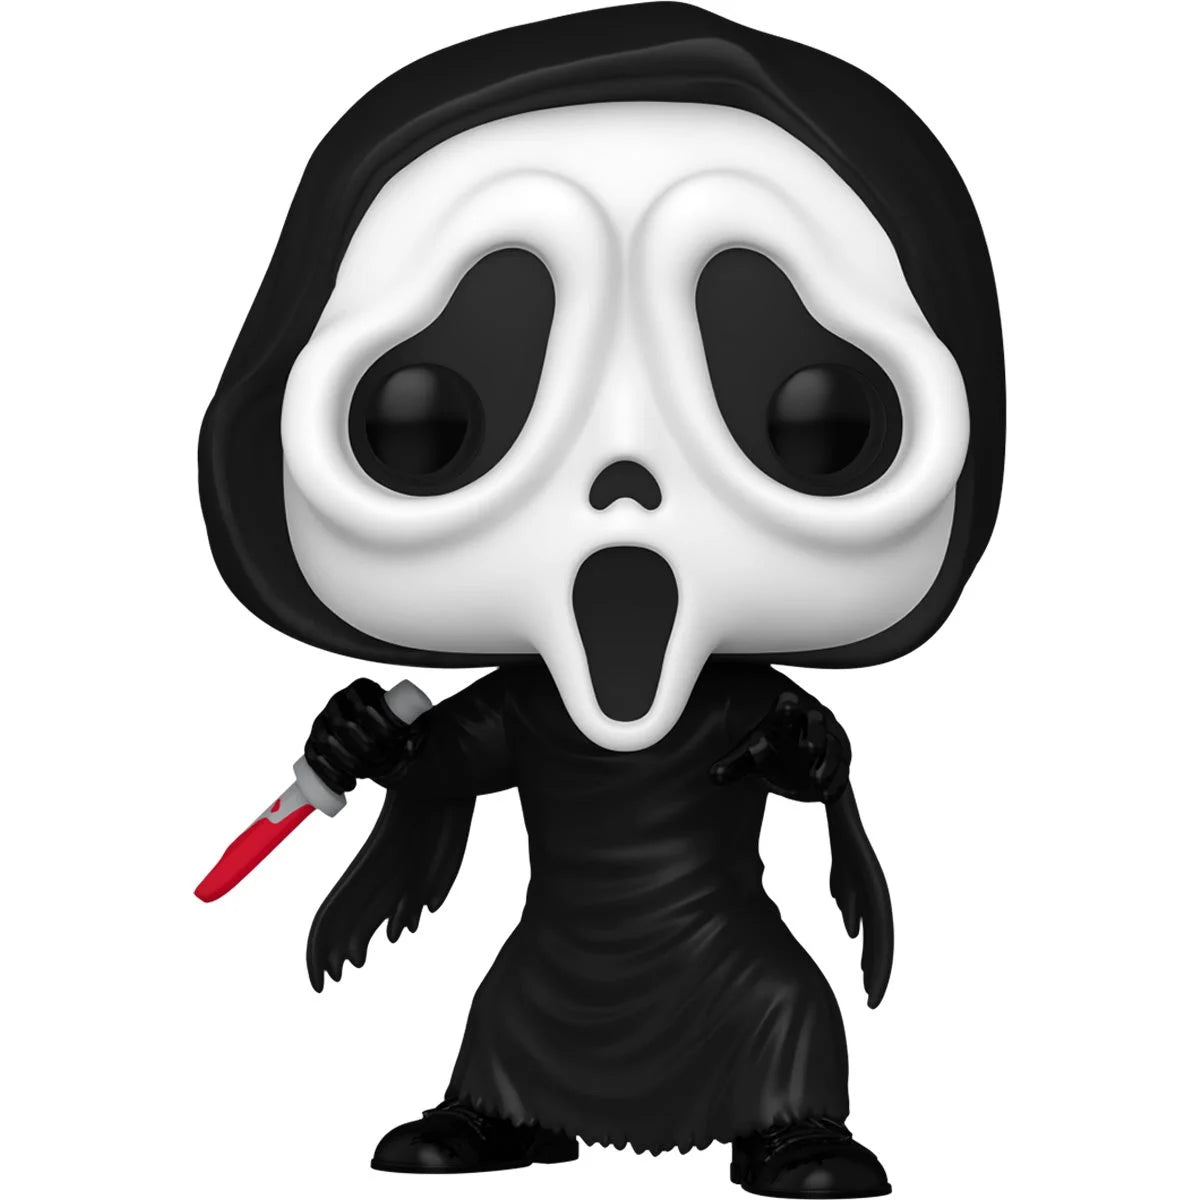 Funko Pop! Ghost Face with Knife Vinyl Figure #1607